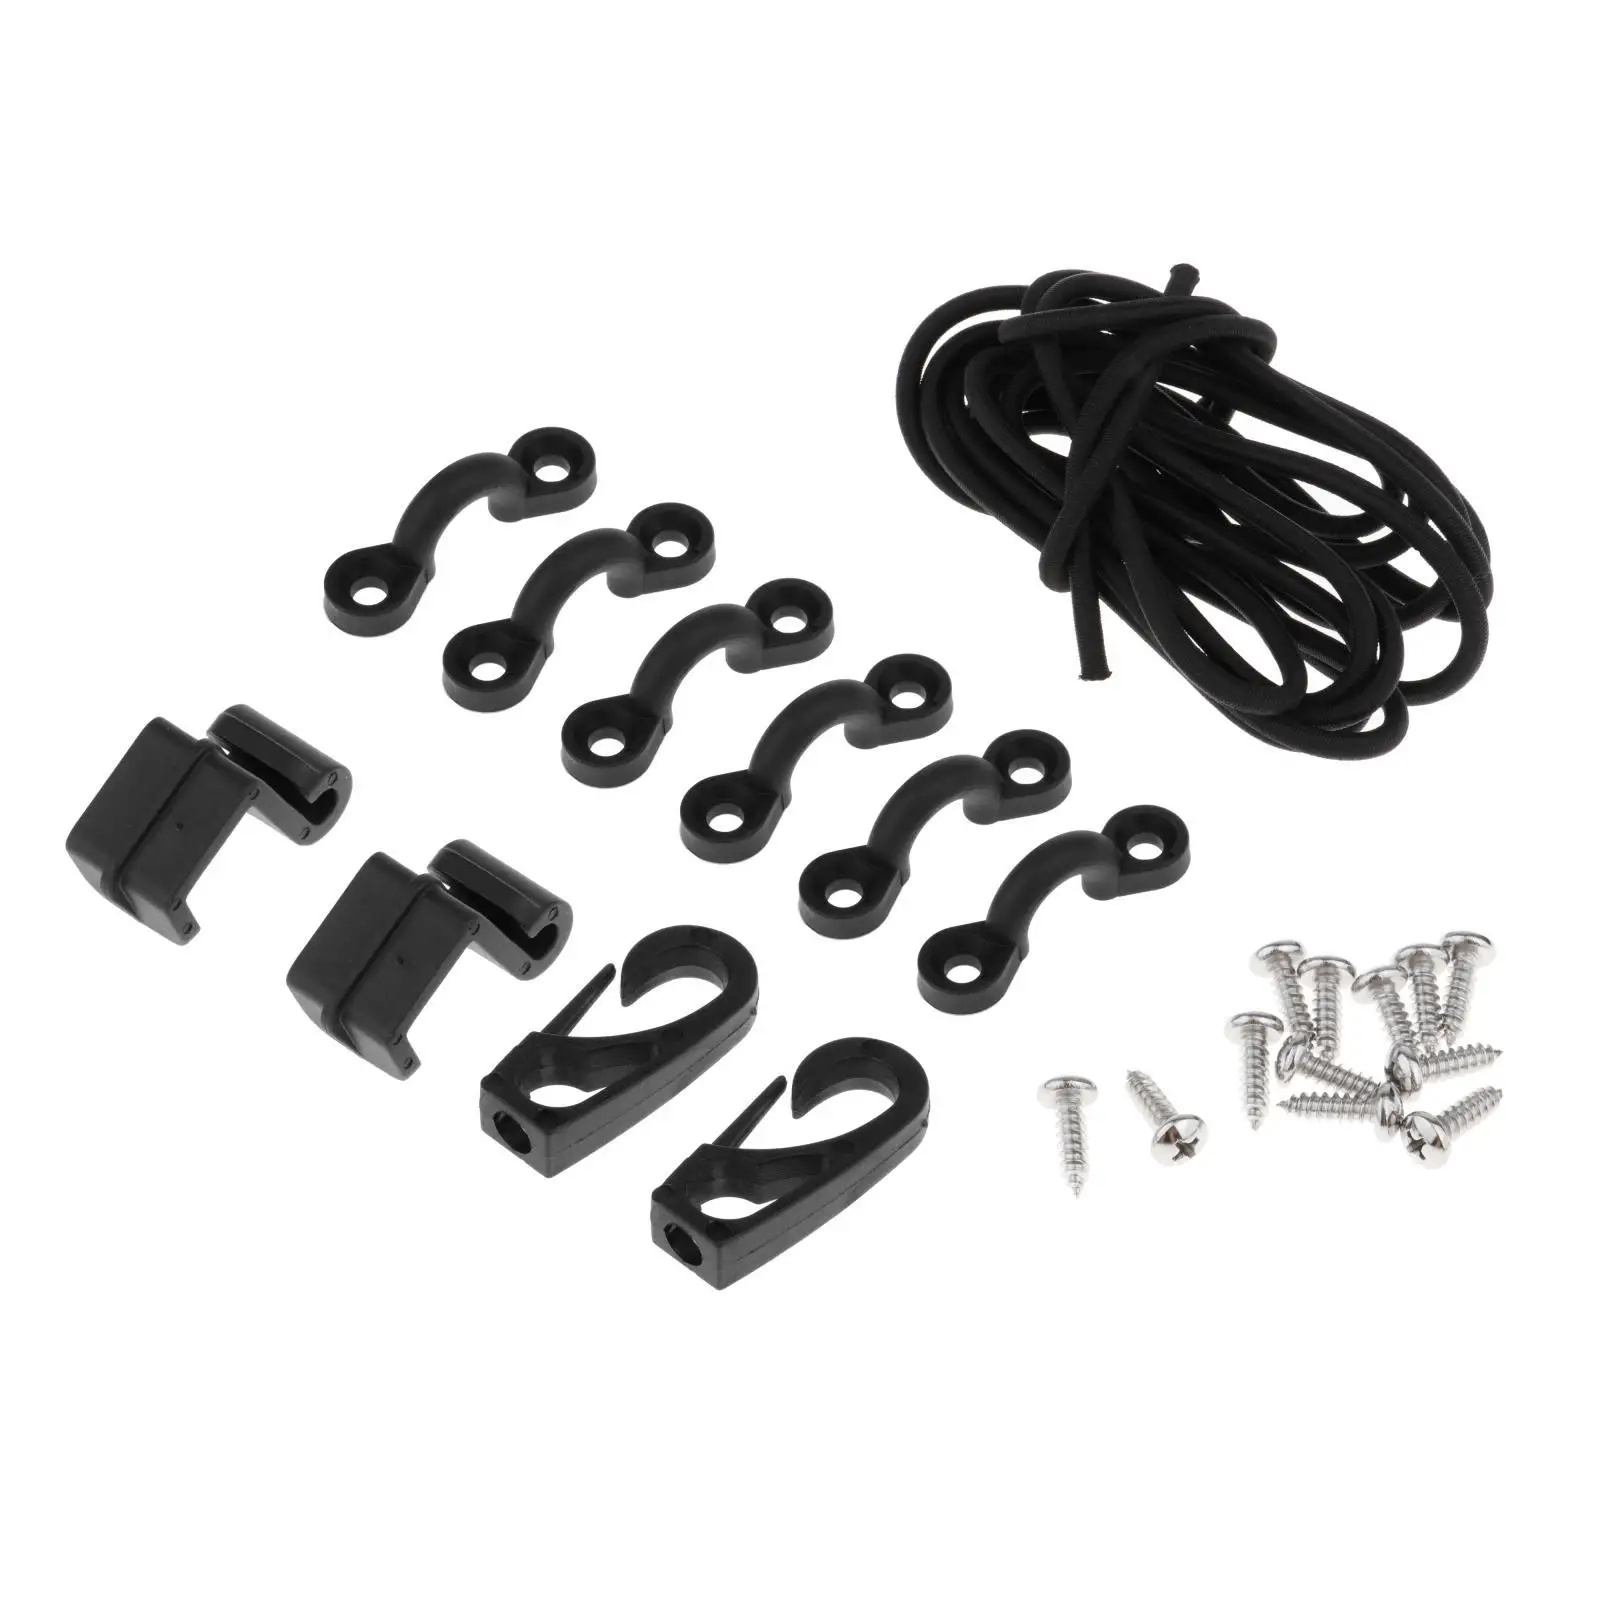 Kayak Bungee Cord Deck Rigging Set Durable Boat Awning Hardware Accessories with Bungee Cord Hooks Tie Down Pad Eye with Screws